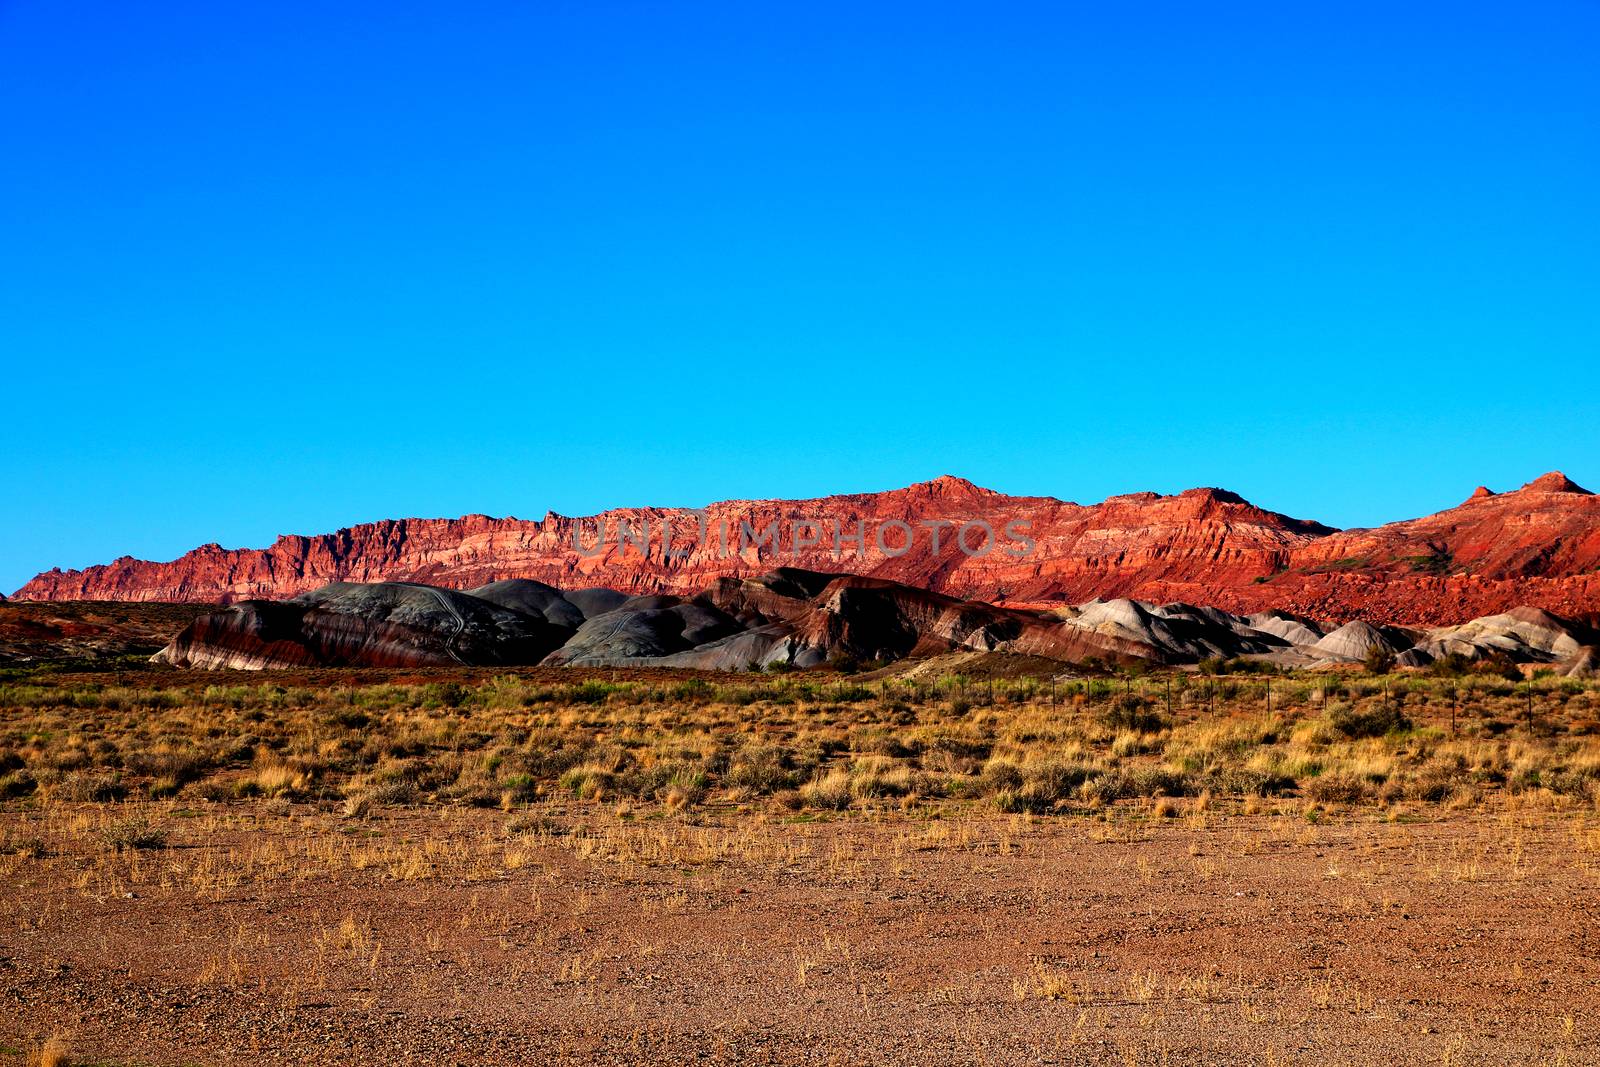 After a raw, gray day of wind-blown showers and flurries, the afternoon sky cleared and shone a beautiful light on the hills by Blue Mesa, in Painted Desert National Park.